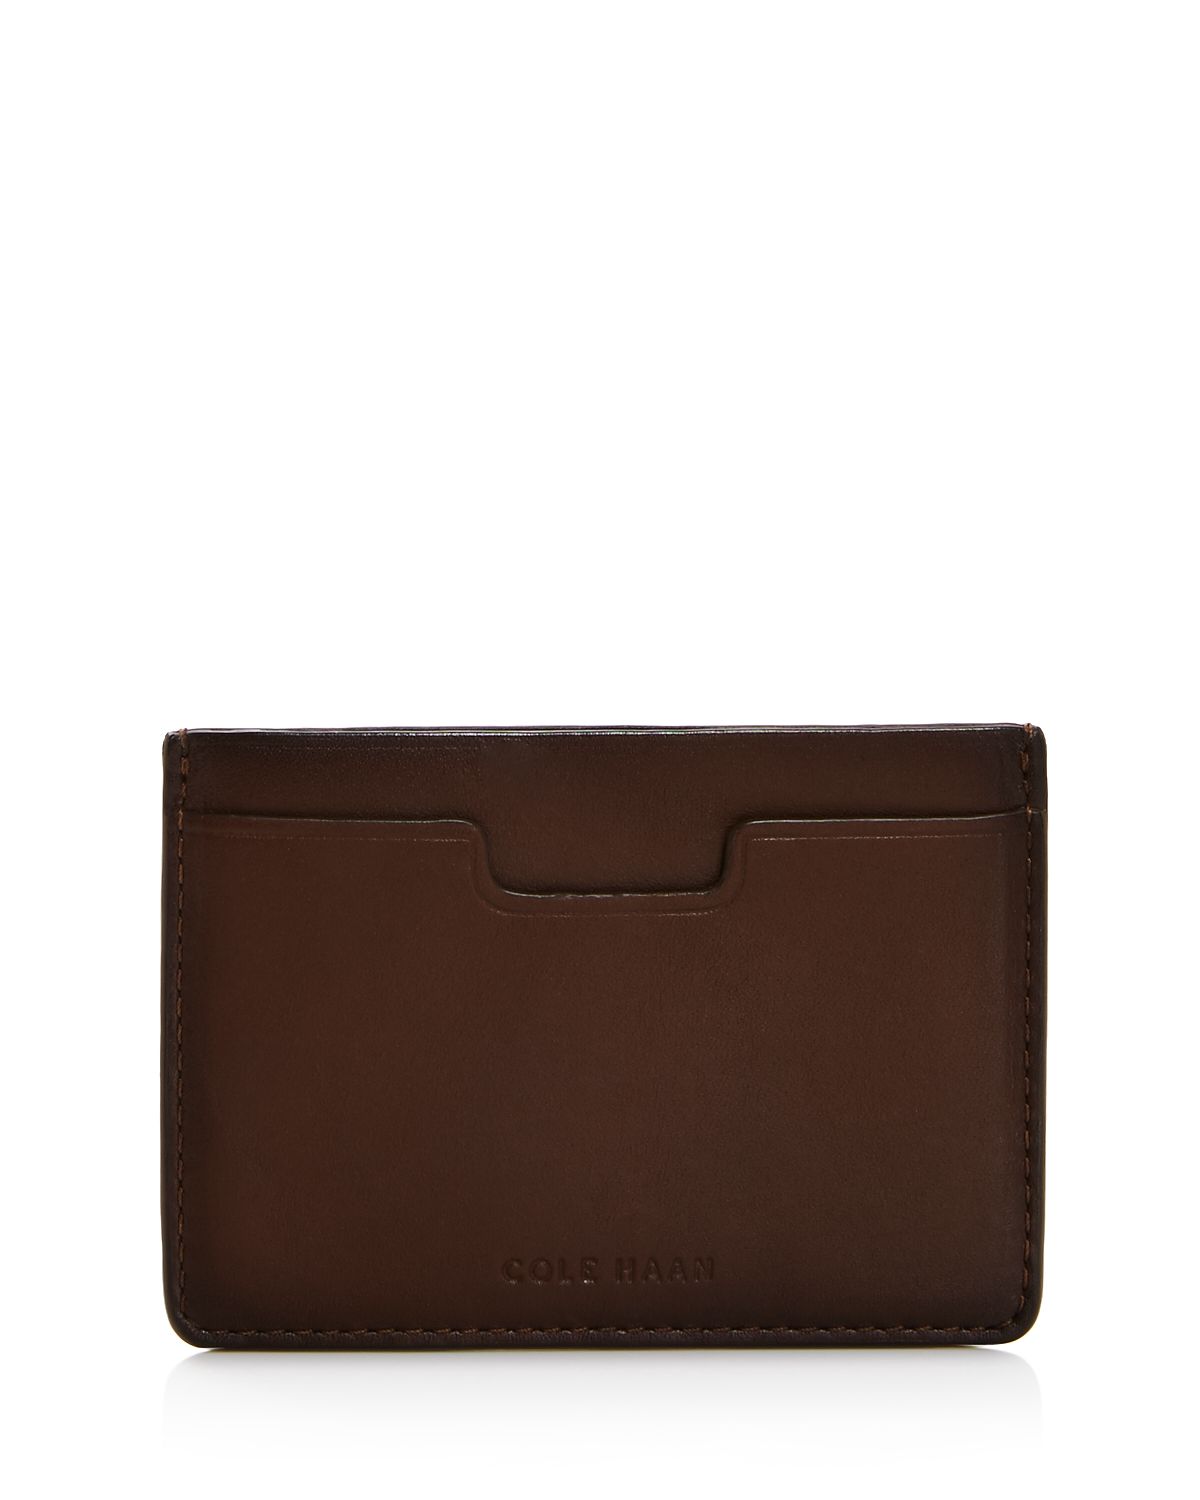 Cole Haan Leather Card Case Bison Brown